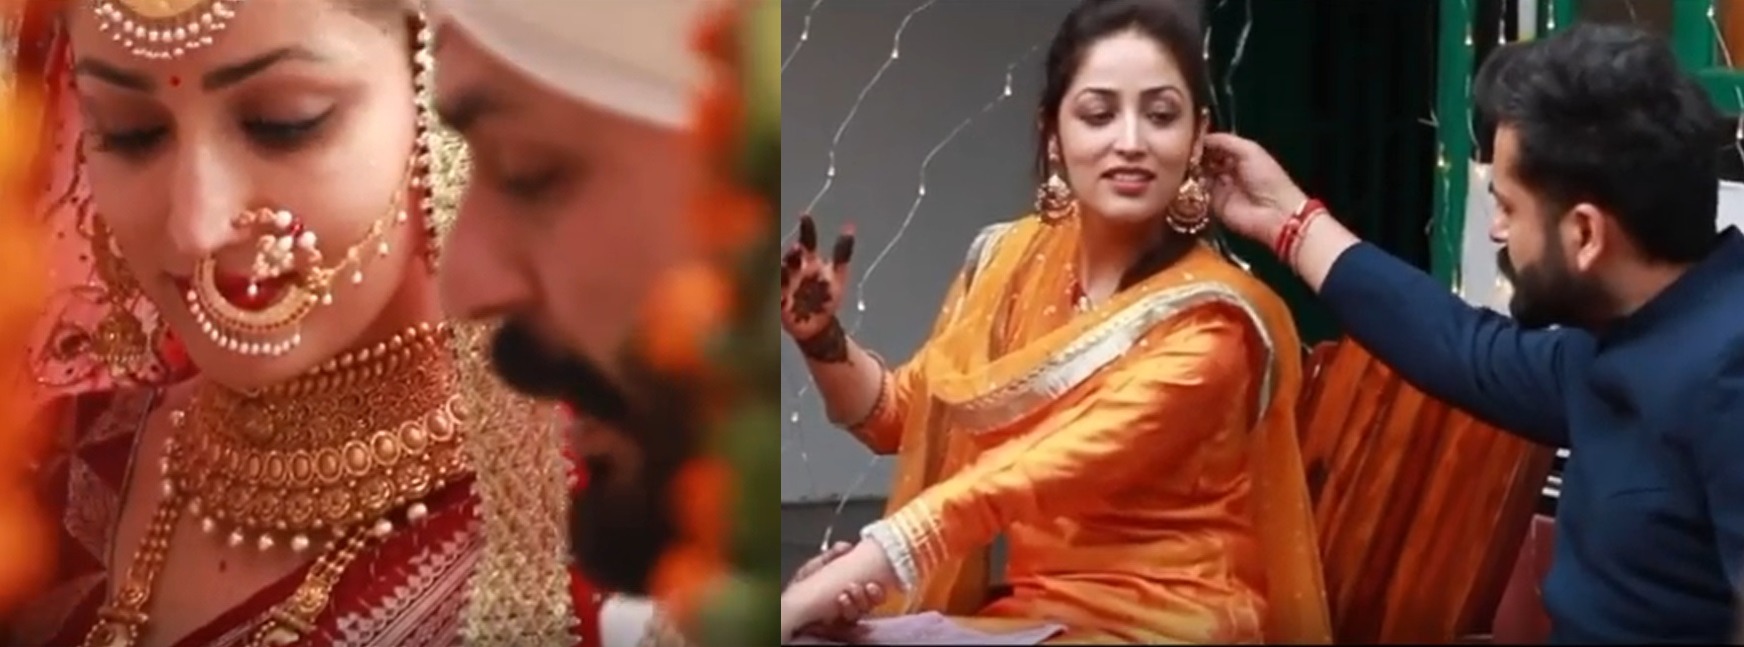 On their first wedding anniversary, Yami Gautam packs a surprise video with a loving message for hubby Aditya Dhar: Watch